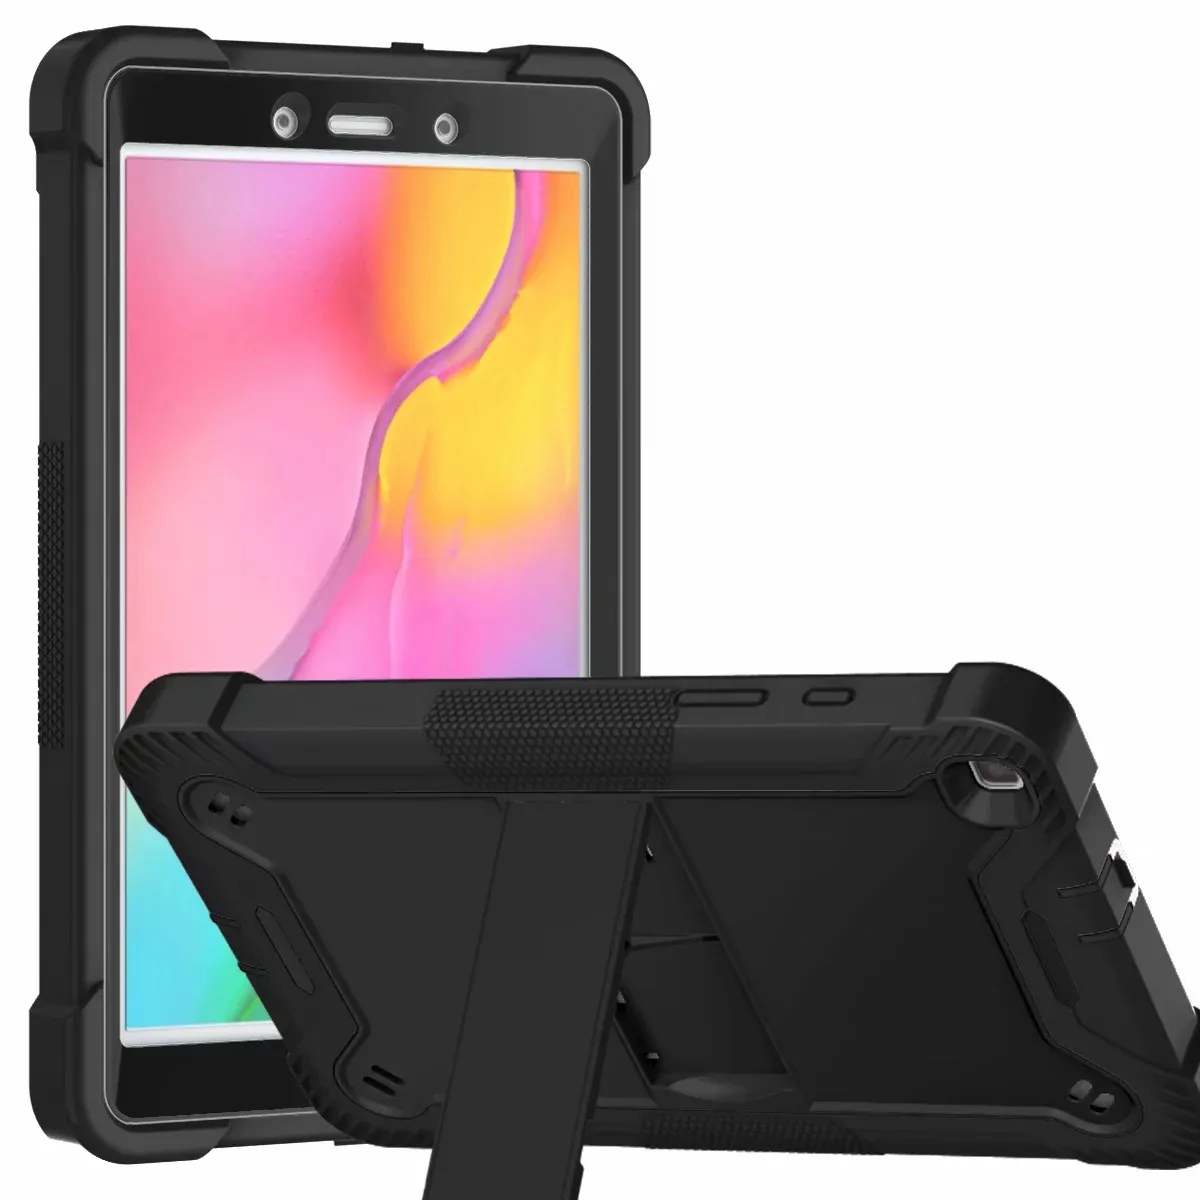 Defender Case for Samsung Galaxy Tab 8 inch T290 T295 with Kickstand Heavy Duty Shockproof Stand Tablet Cover